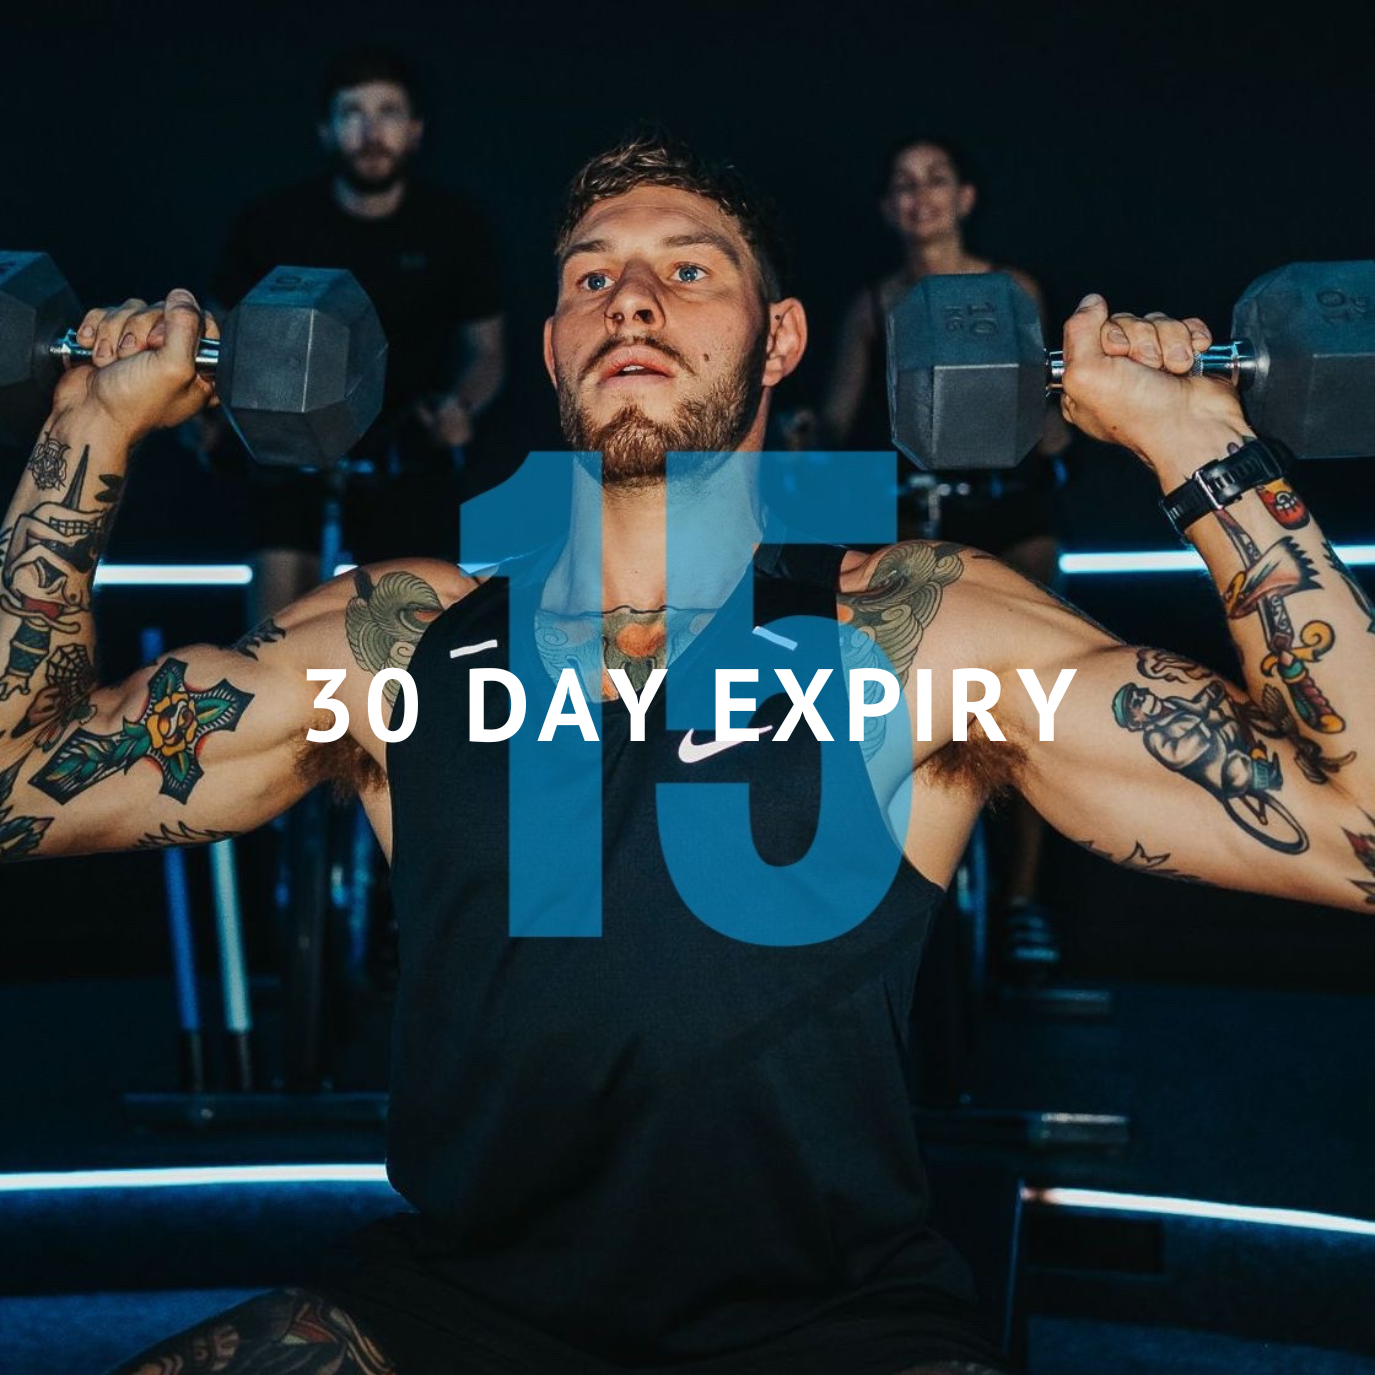 15 Sessions • 30 day expiry